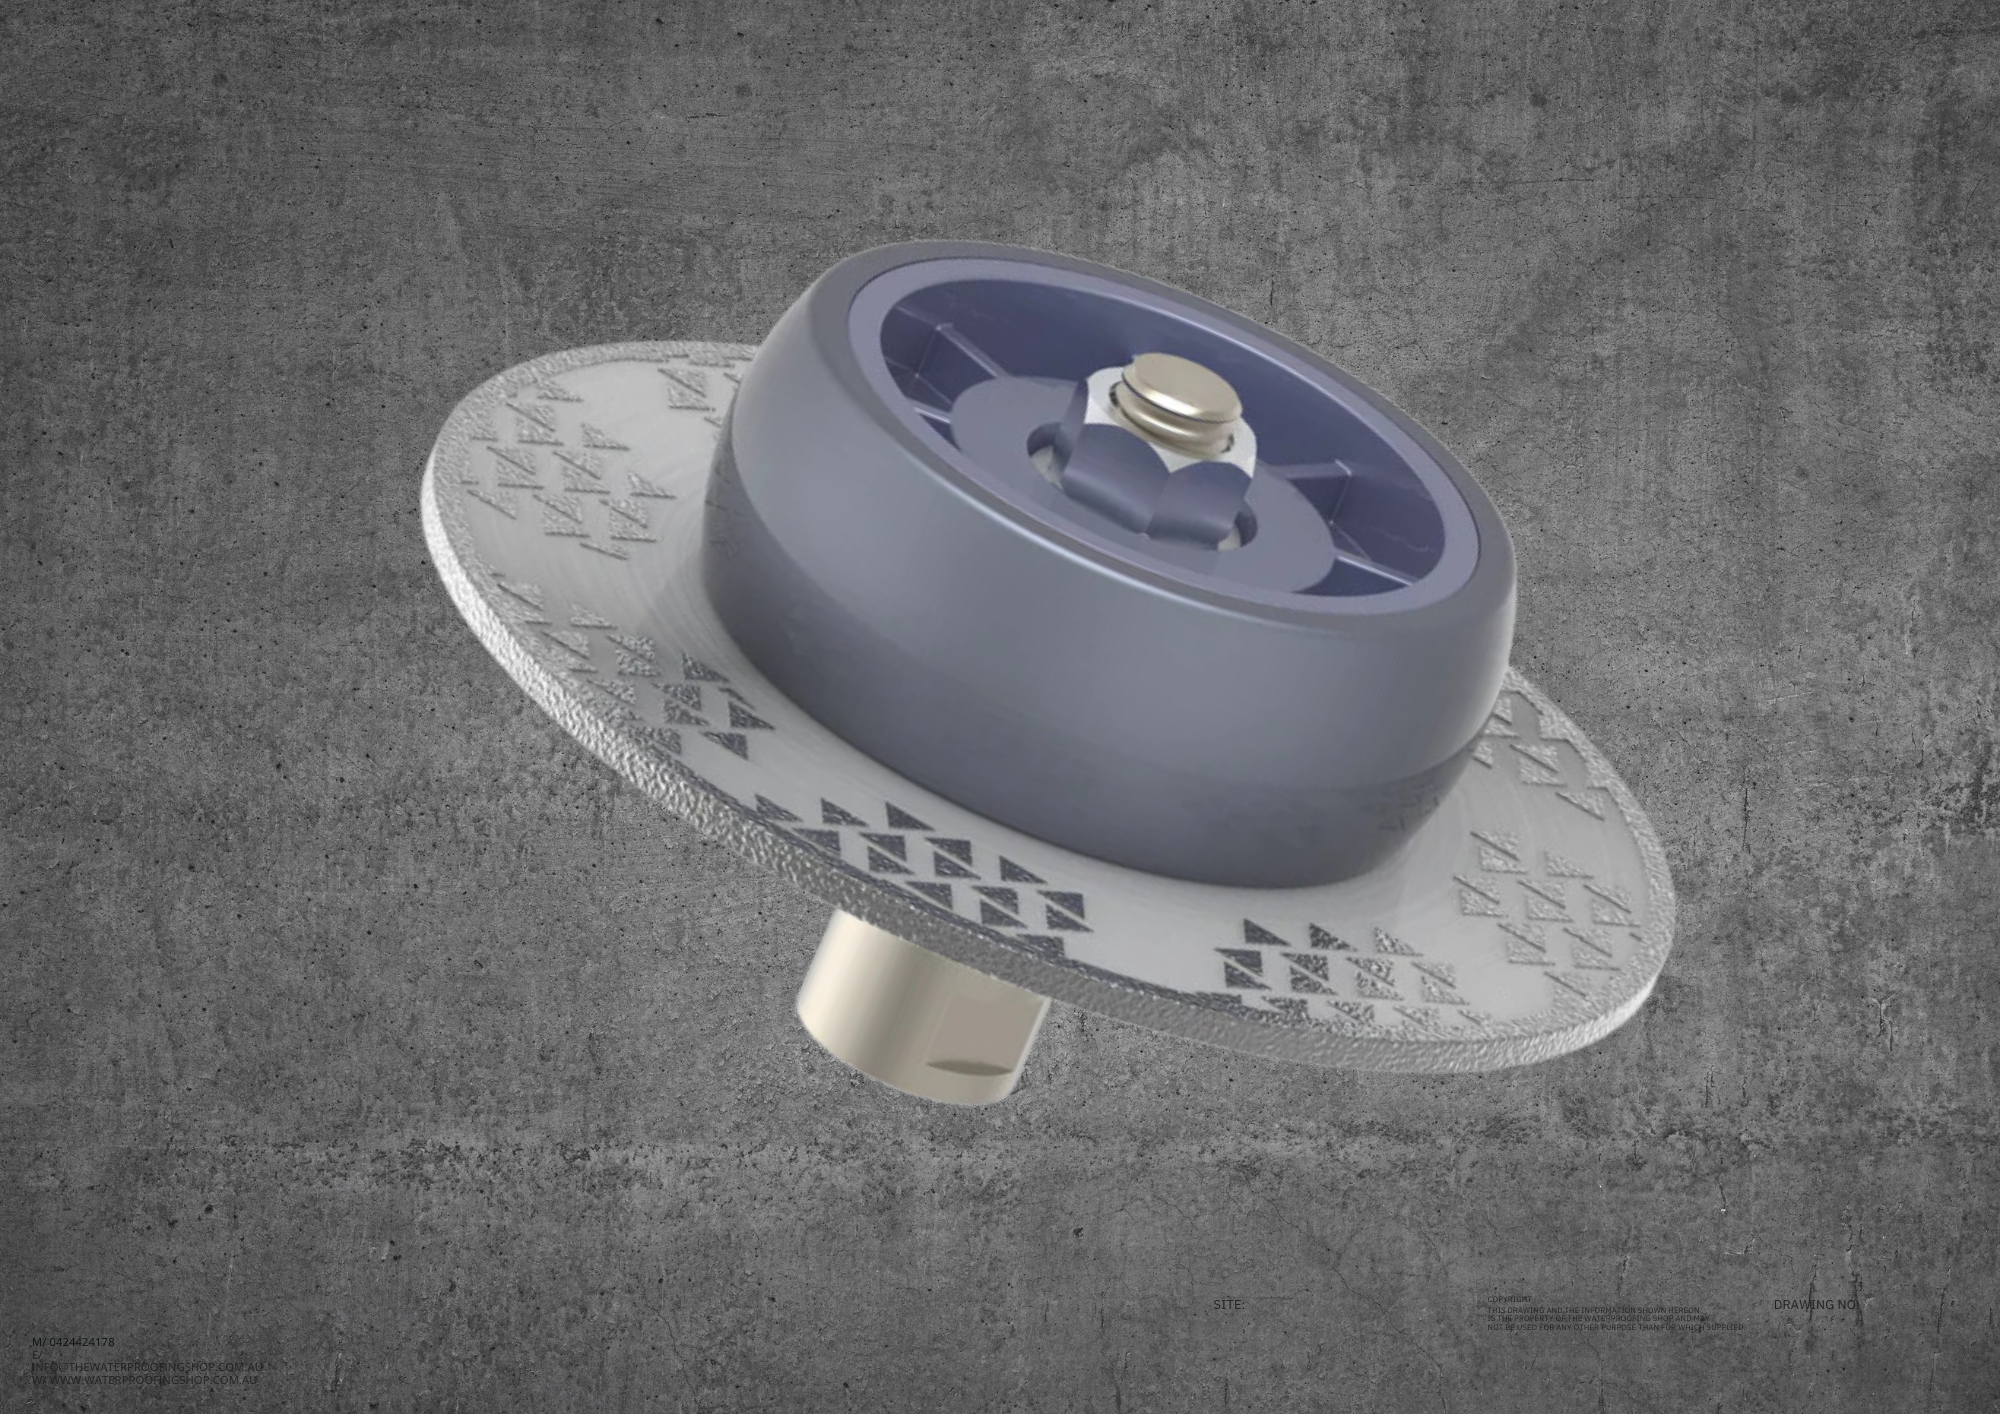 Innovative Tools 150mm Concrete Puddle Flange Recess Disc: A Must-Have for DIY and Construction Workers